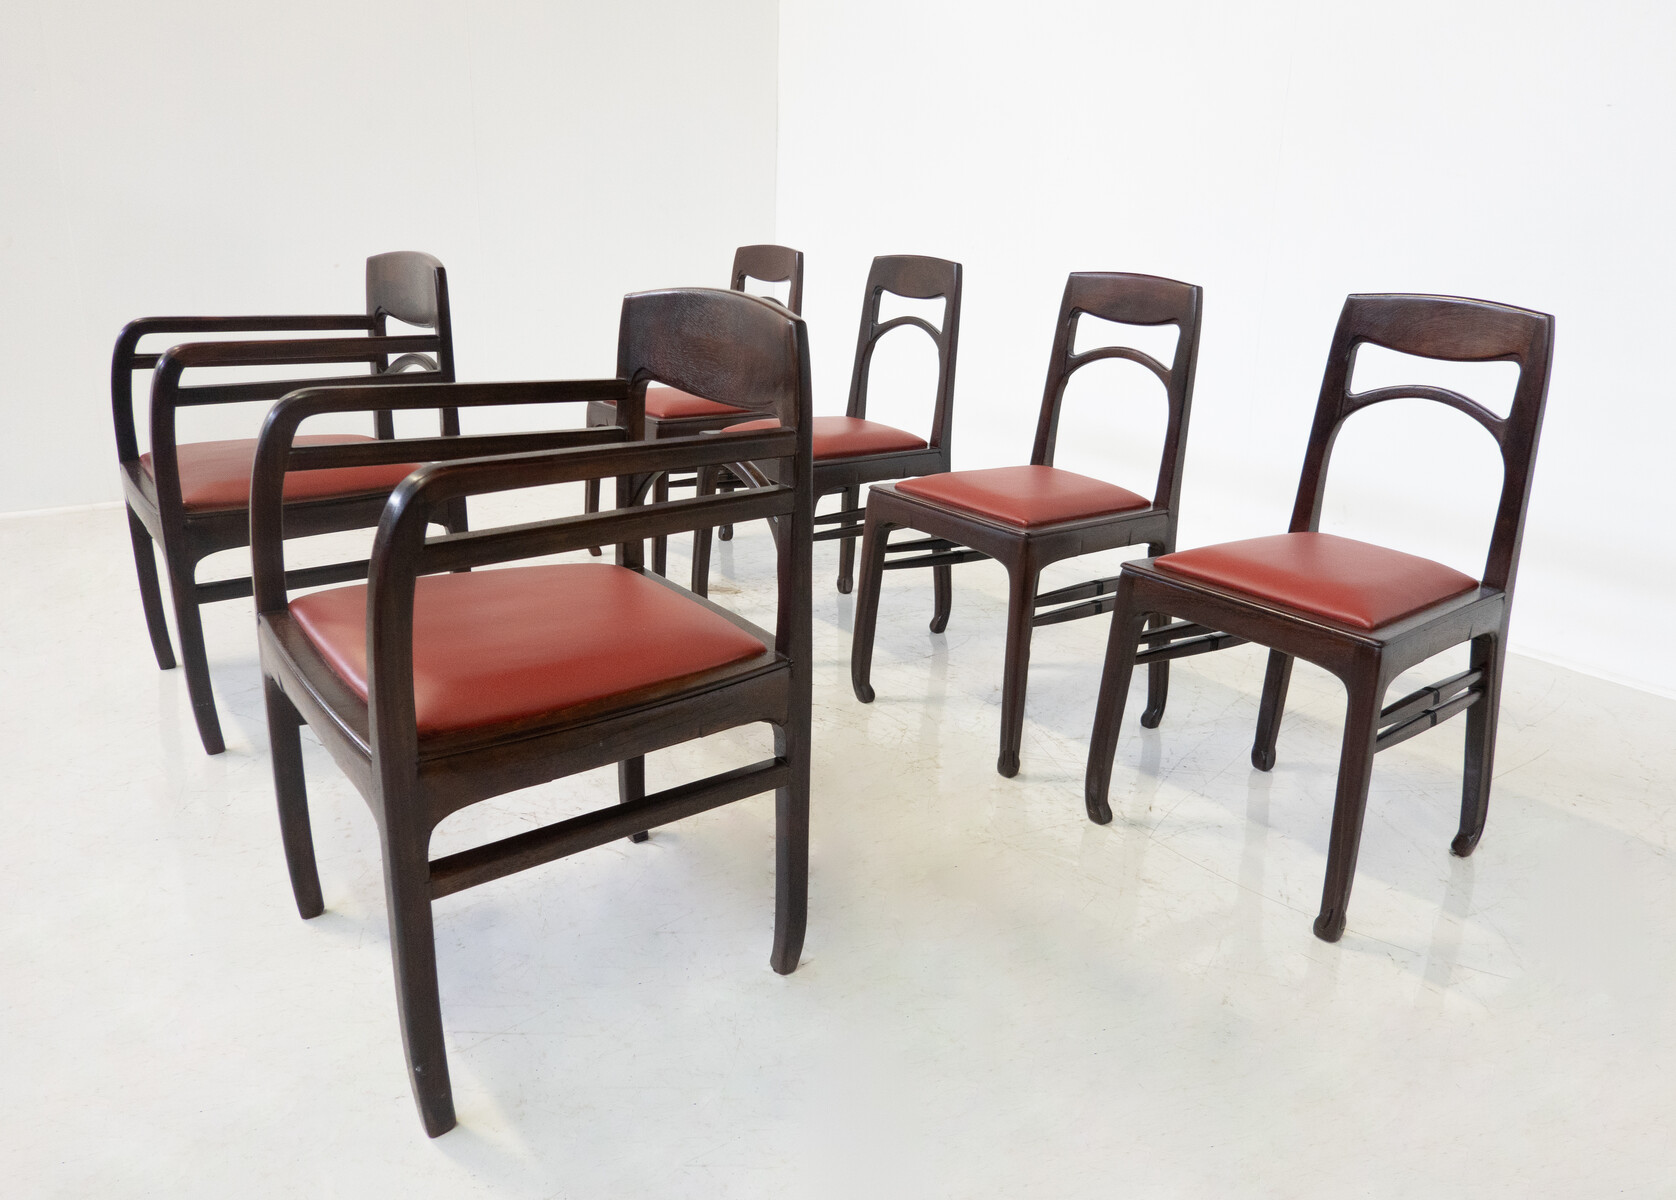 Art Nouveau Set of 6 Wood and Leather Armchairs by Richard Riemerschmid